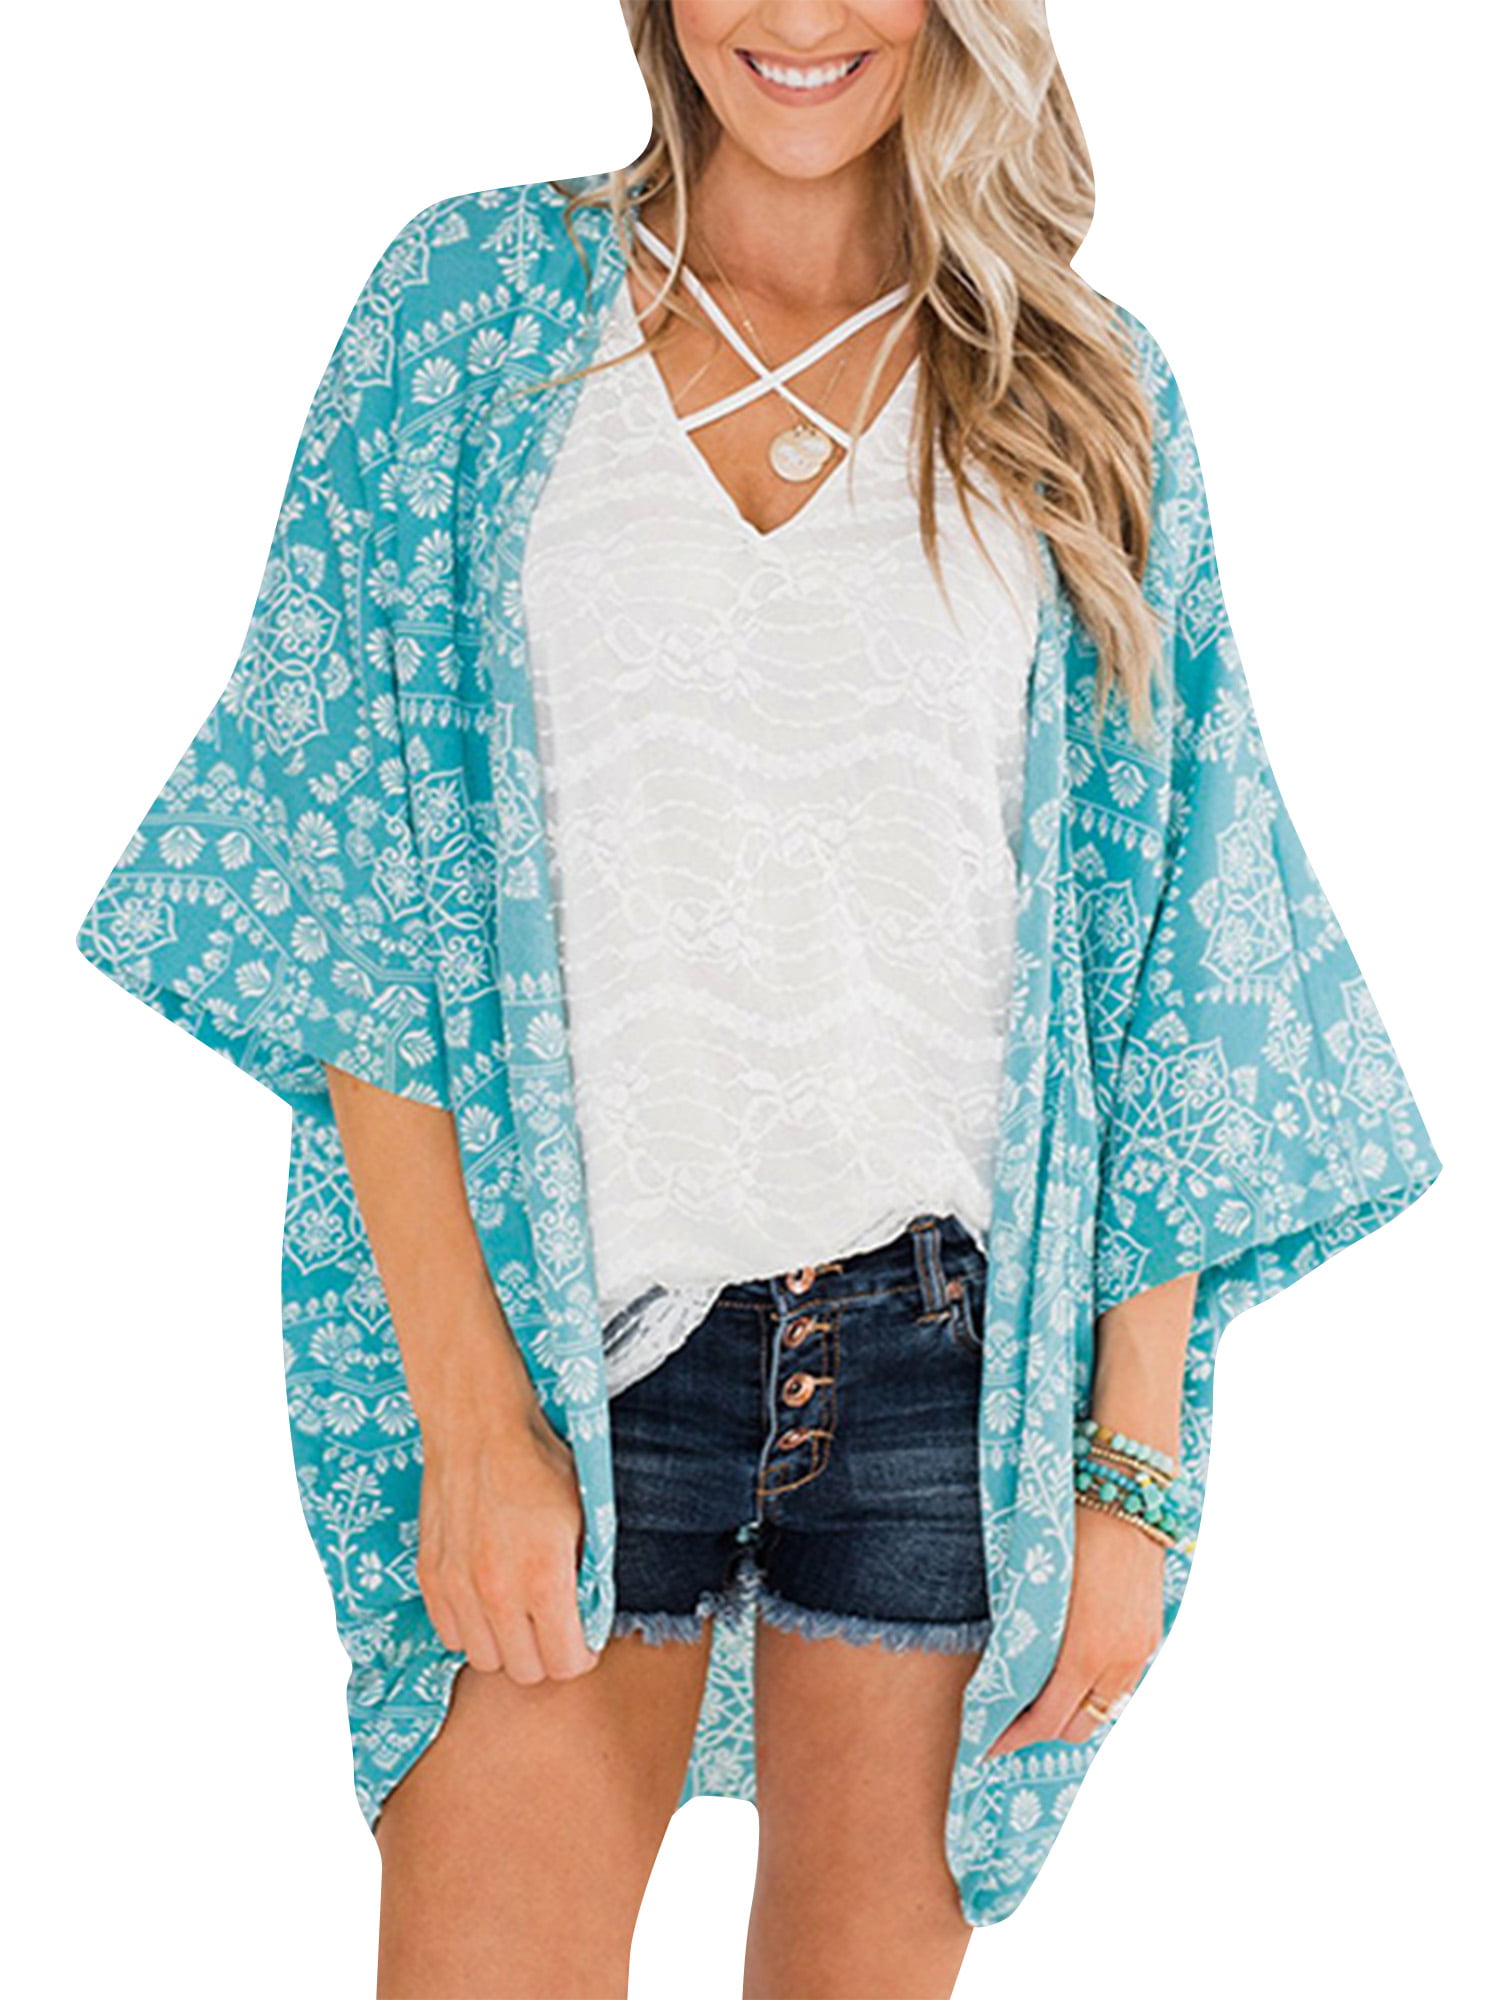 Women's Floral Kimono Cardigans Chiffon Casual Loose Open Front Cover Ups Tops S-XXXL